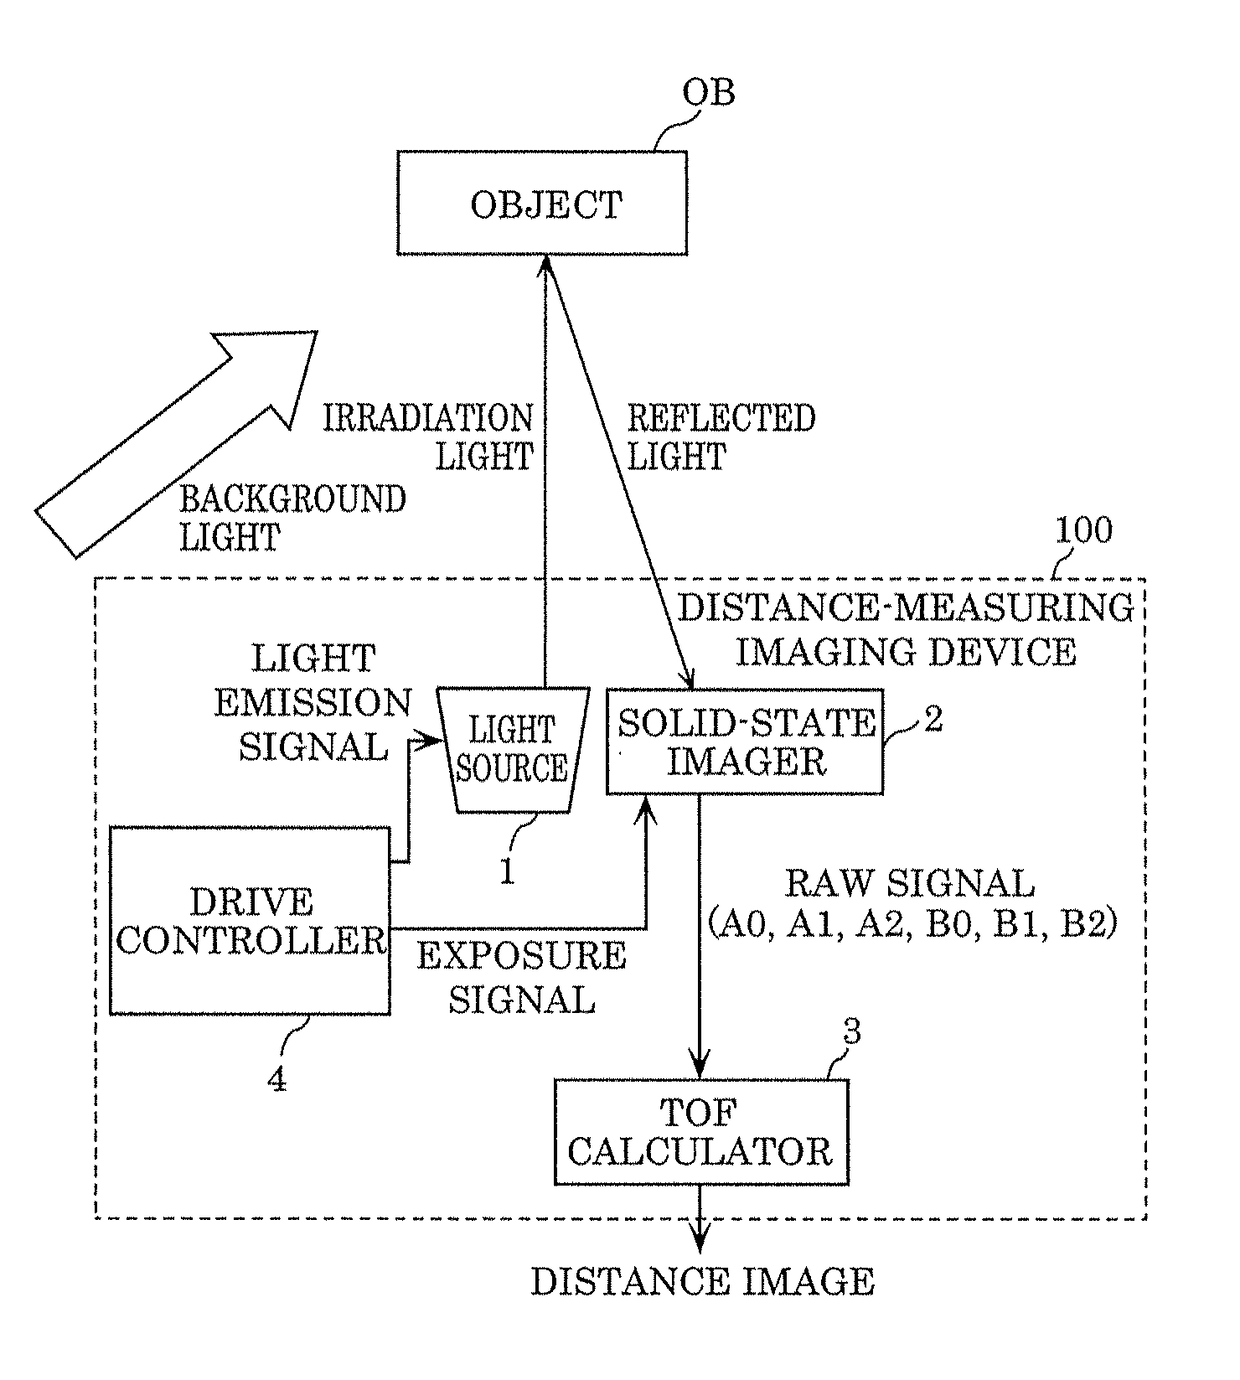 Distance-measuring imaging device and solid-state imaging device